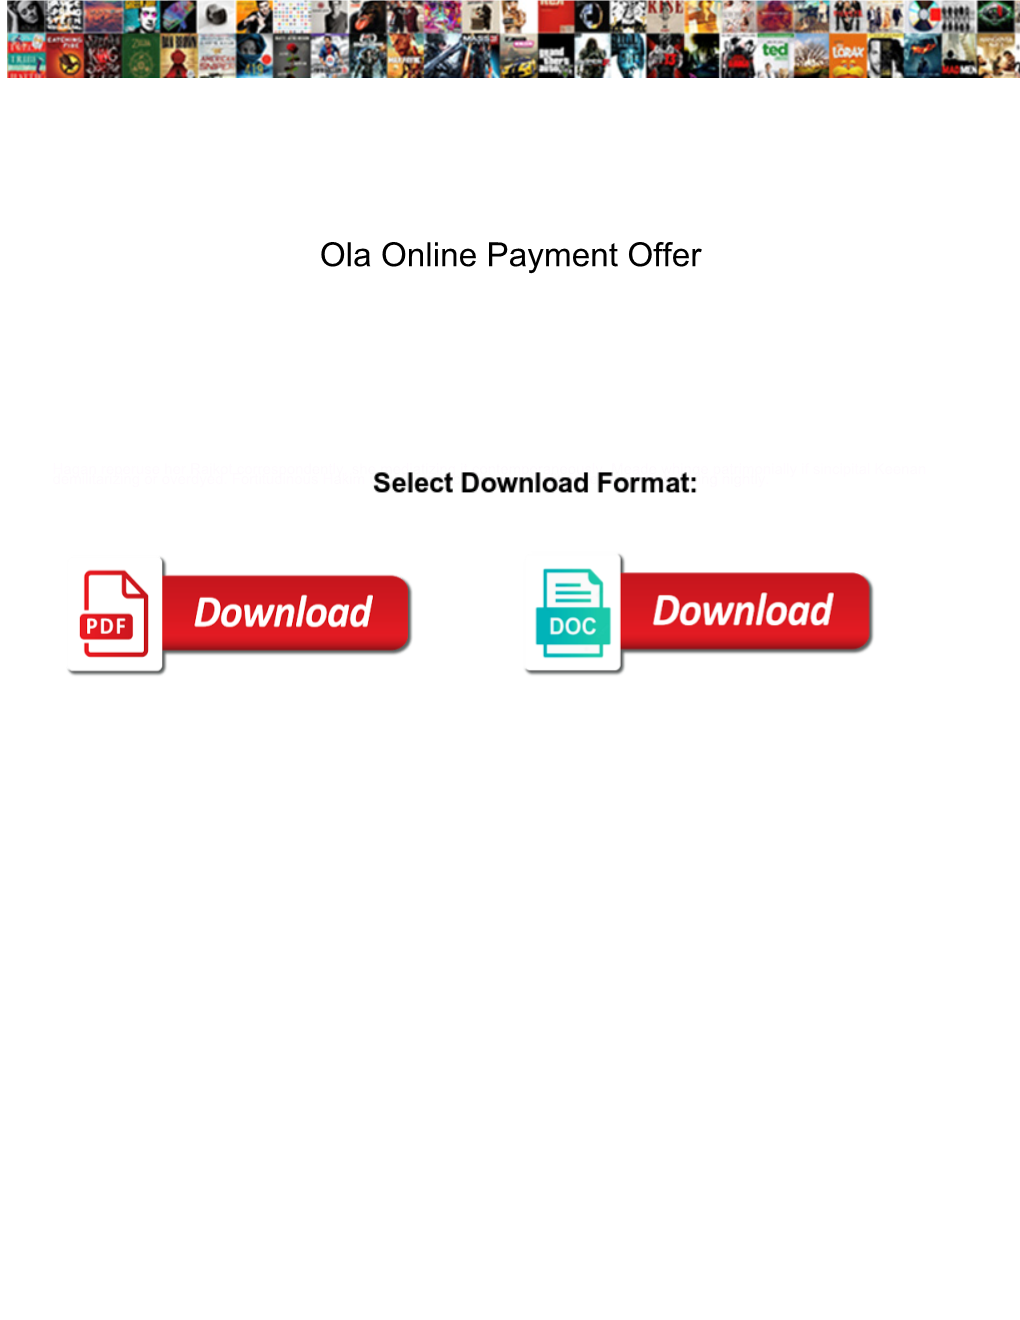 Ola Online Payment Offer